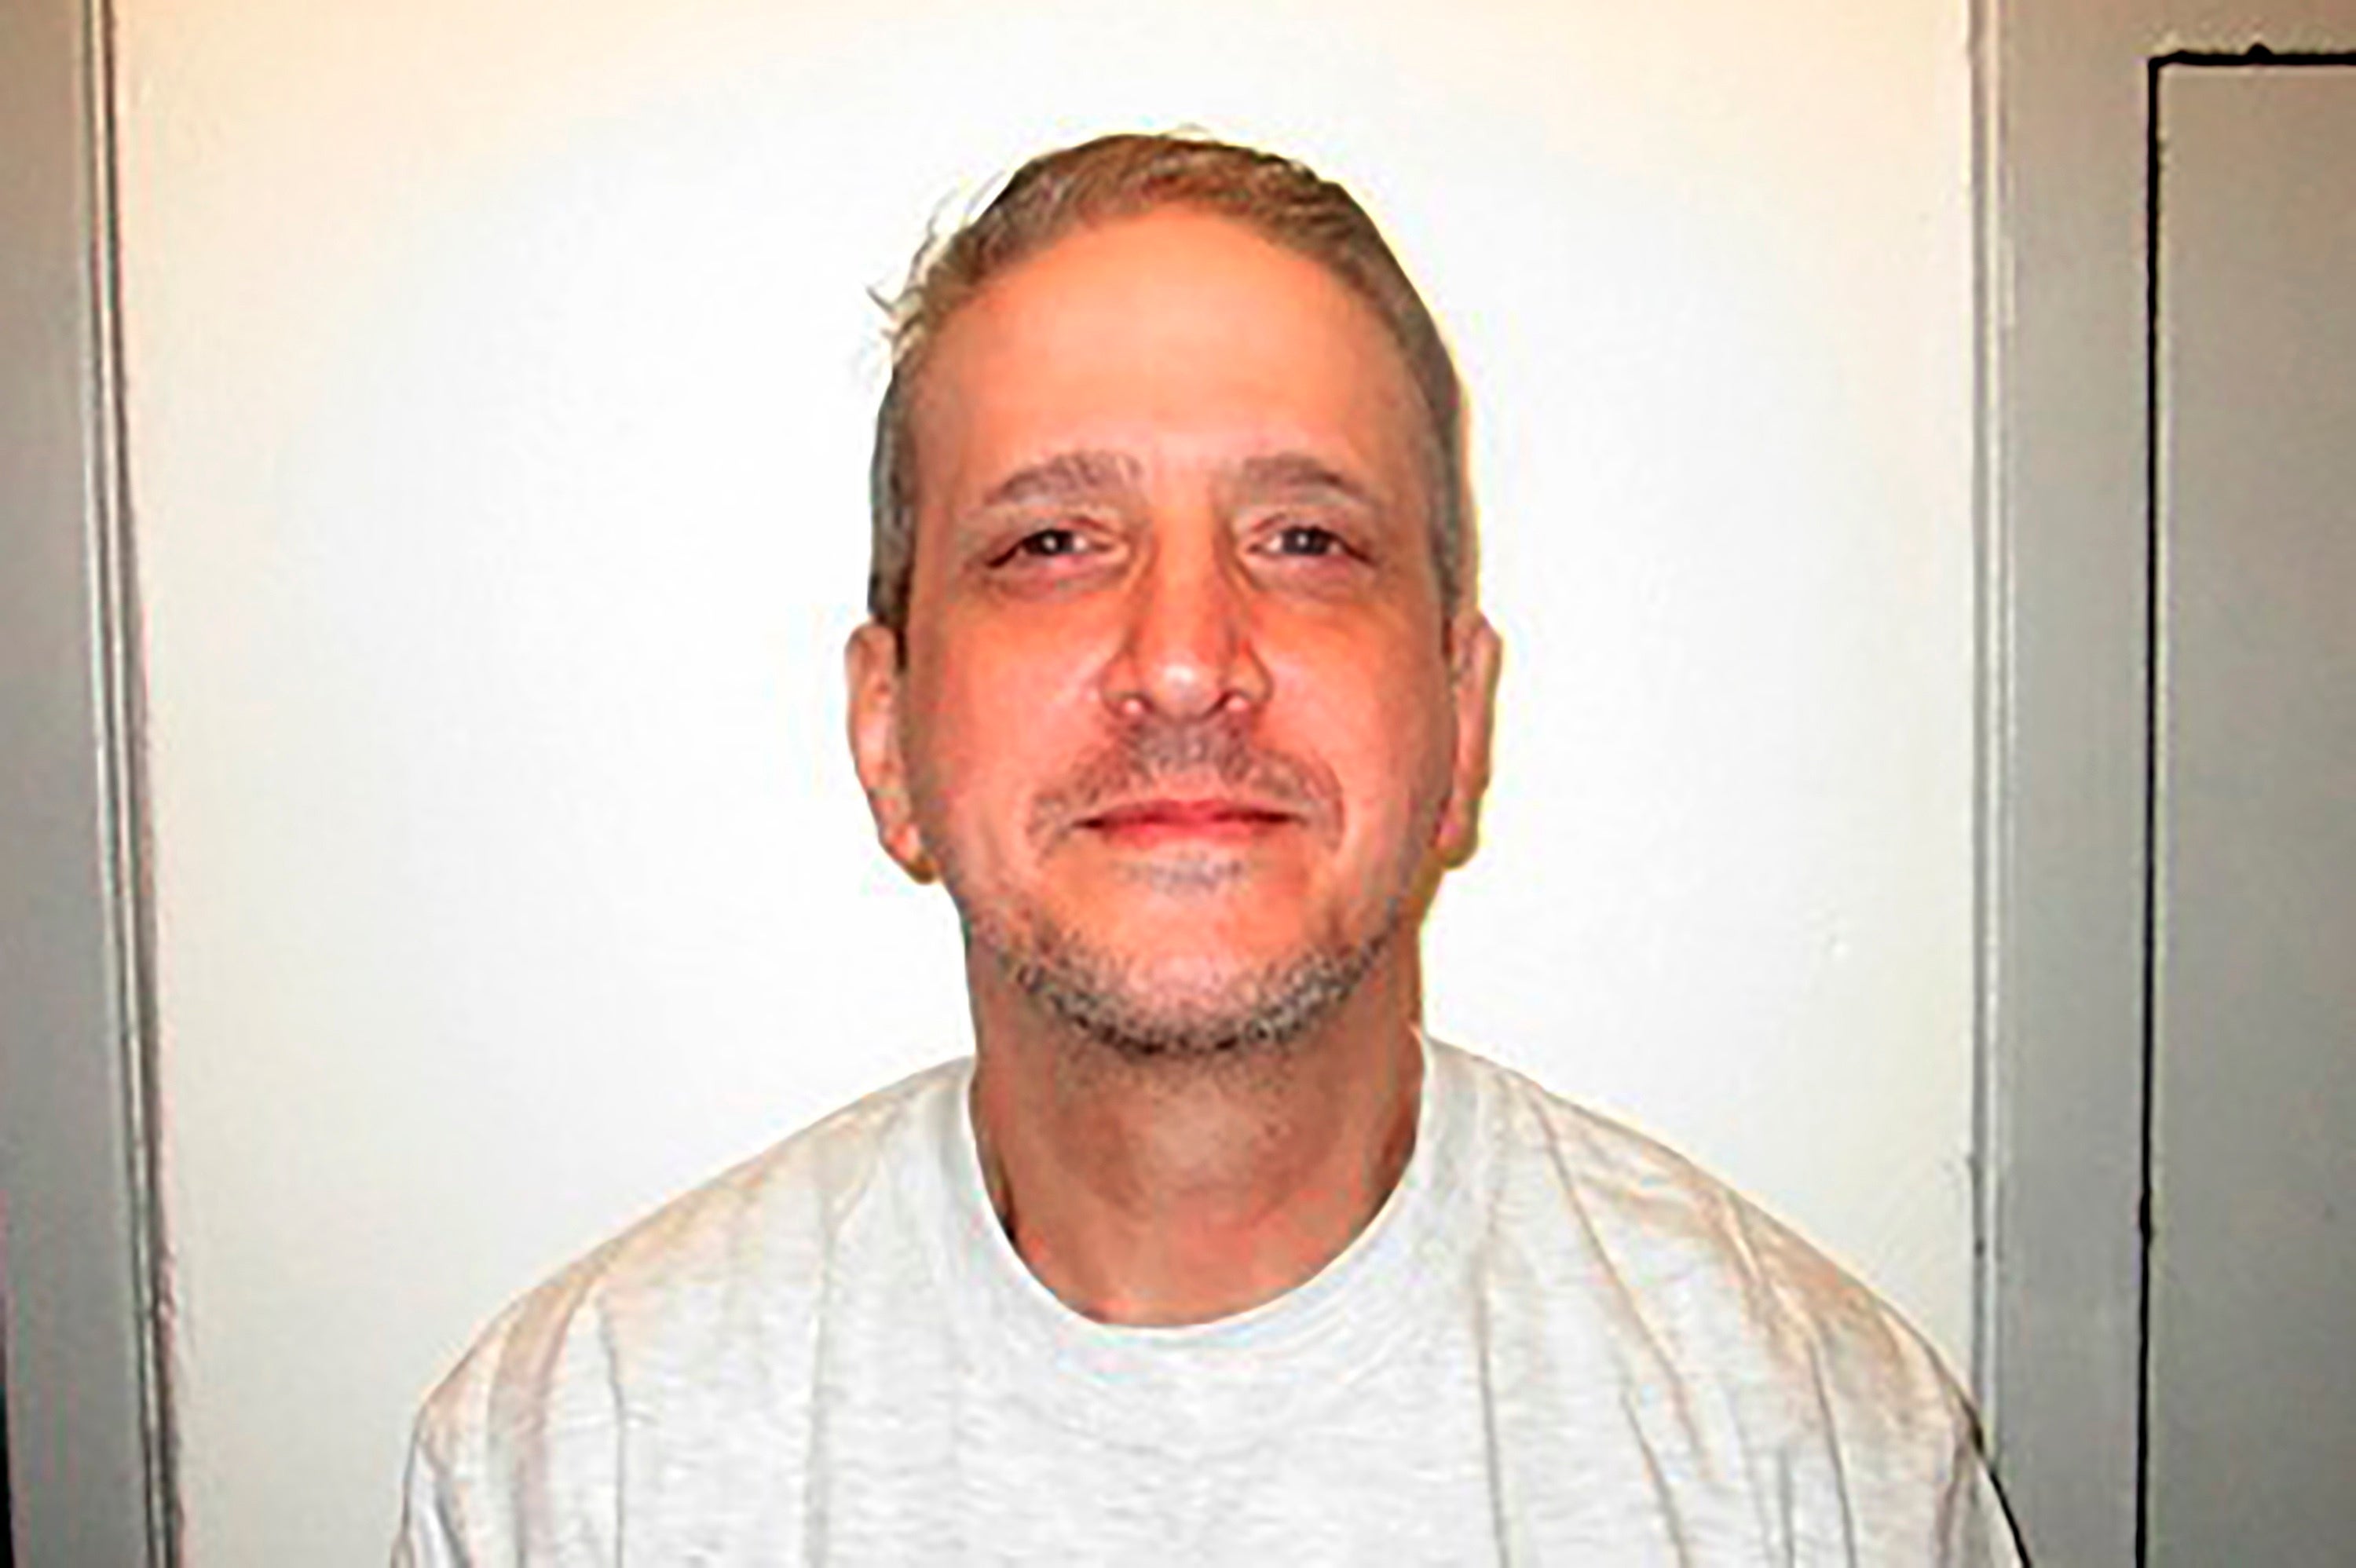 Richard Glossip was convicted of ordering the 1997 murder of his boss at an Oklahoma City motel and has been in criminal justice limbo ever since